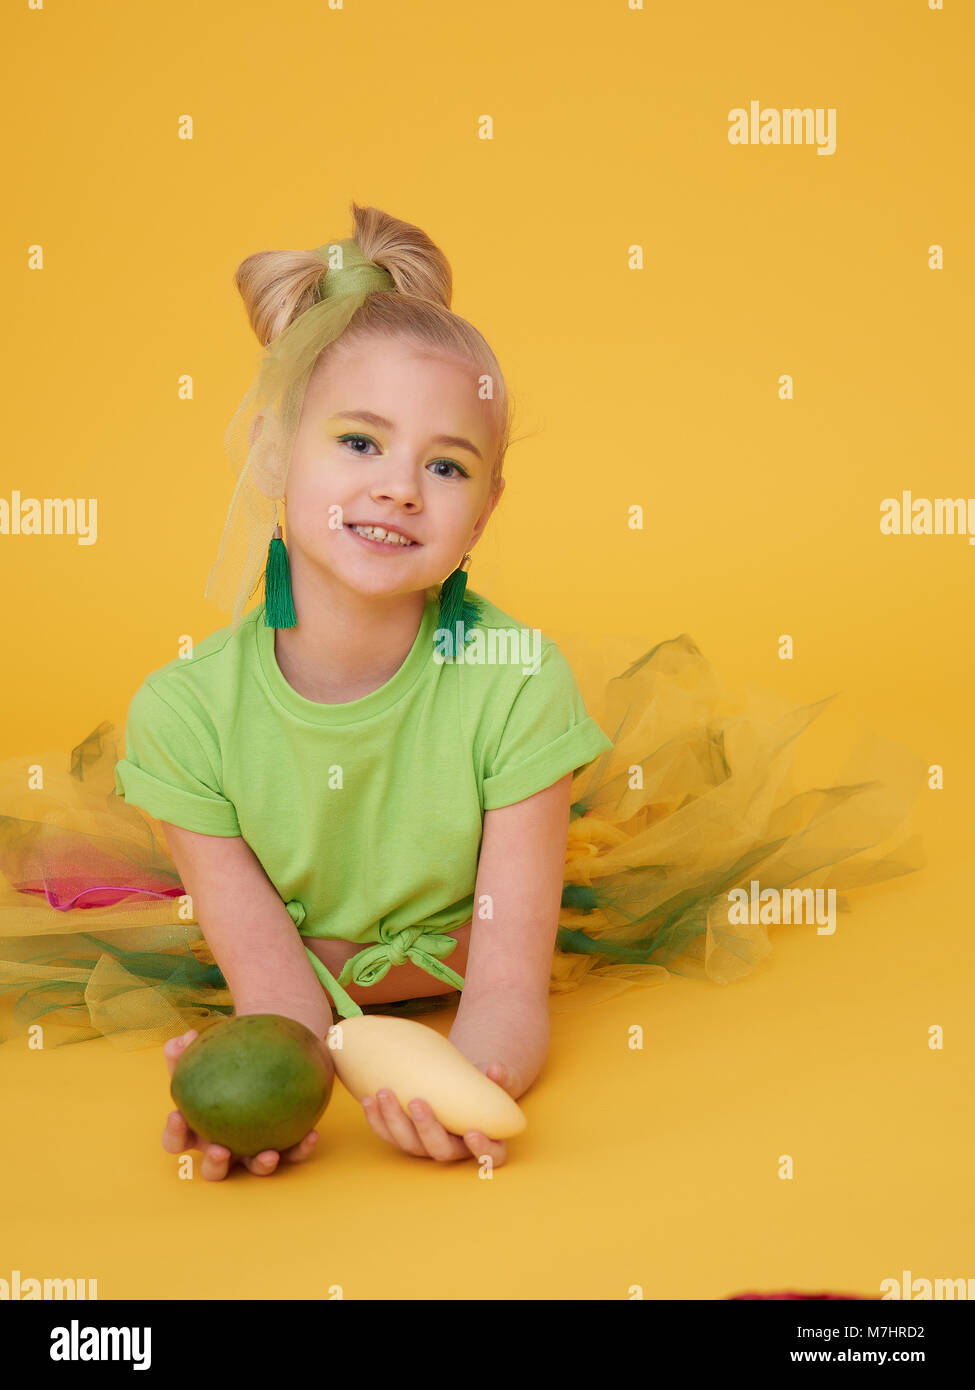 The fair-haired little girl wears a light green t-shirt and a bright colorful skirt.Holding the baby holding the mango fruits of different varieties.  Stock Photo